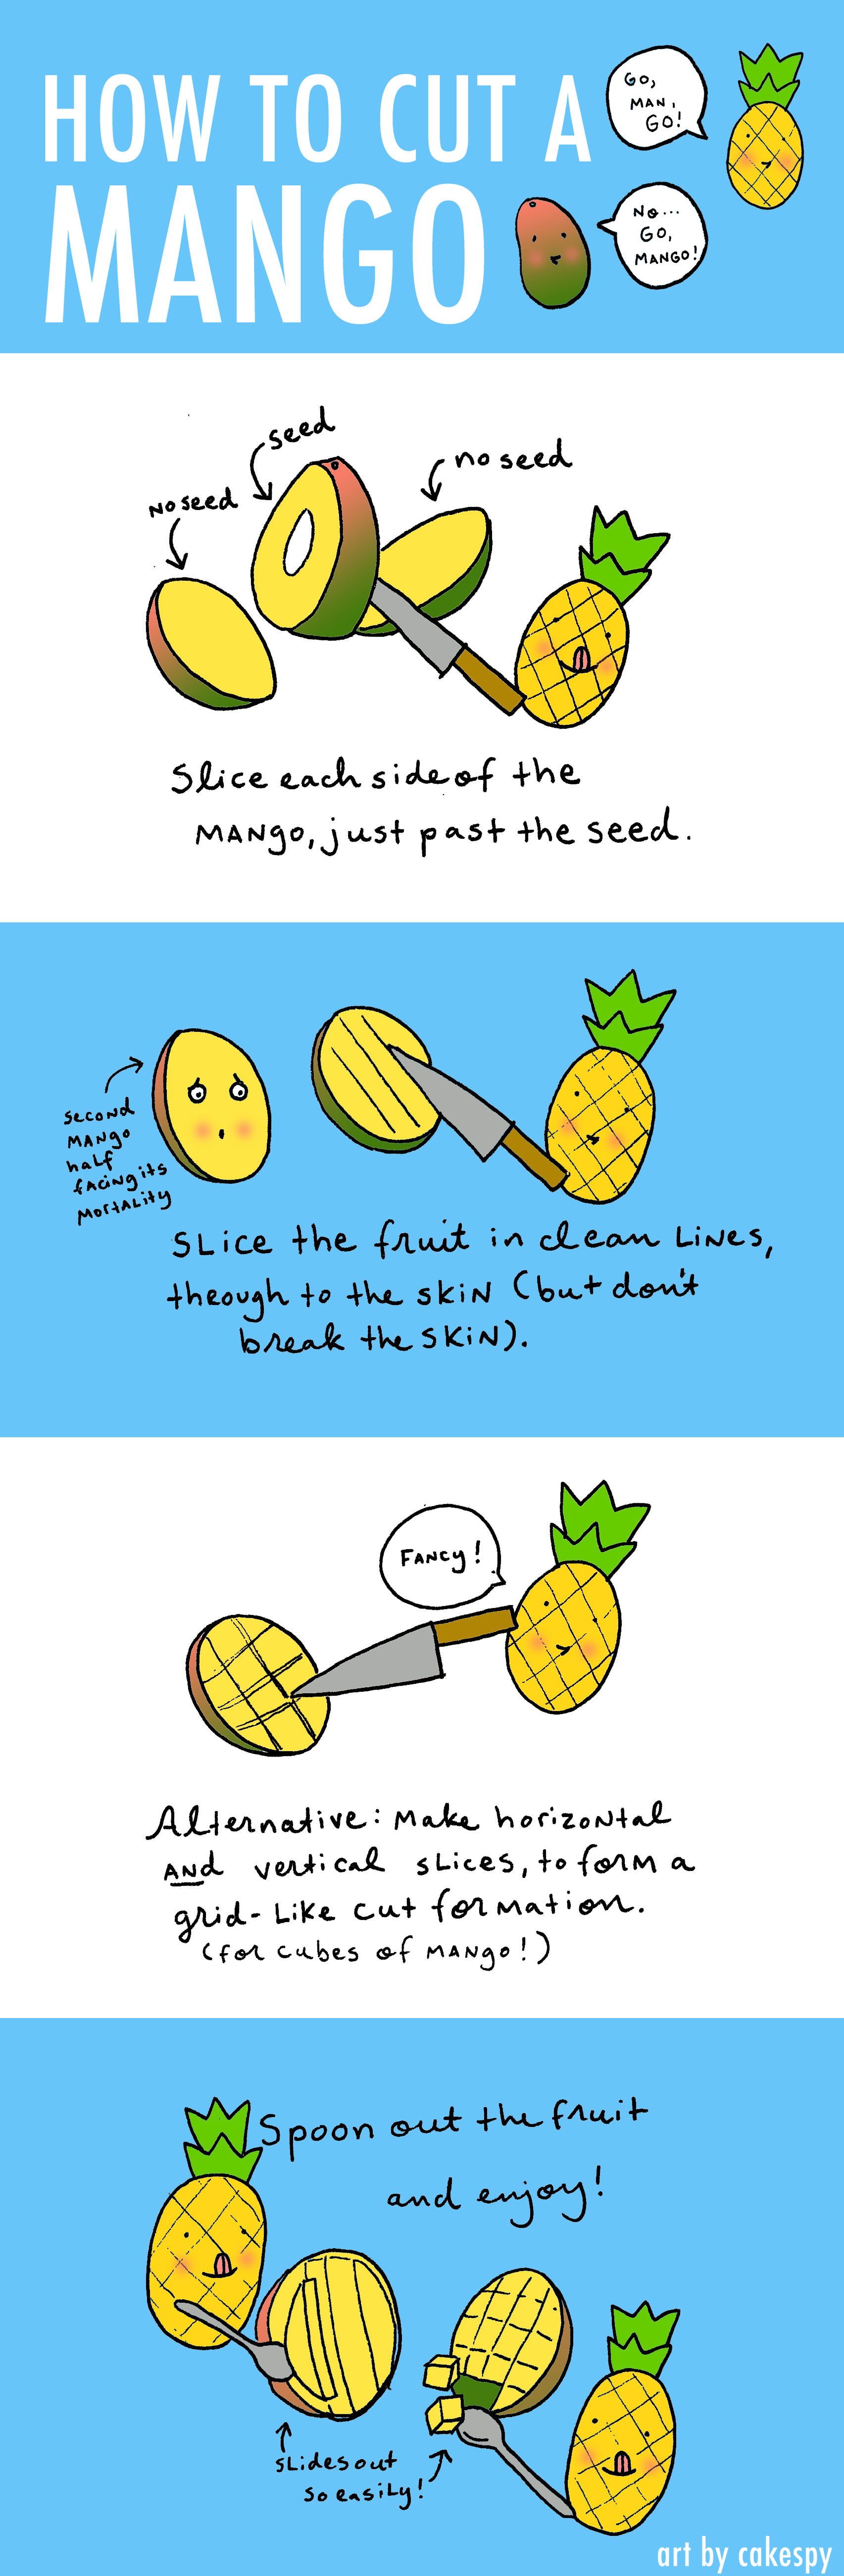 How to Cut a Mango [Infographic]